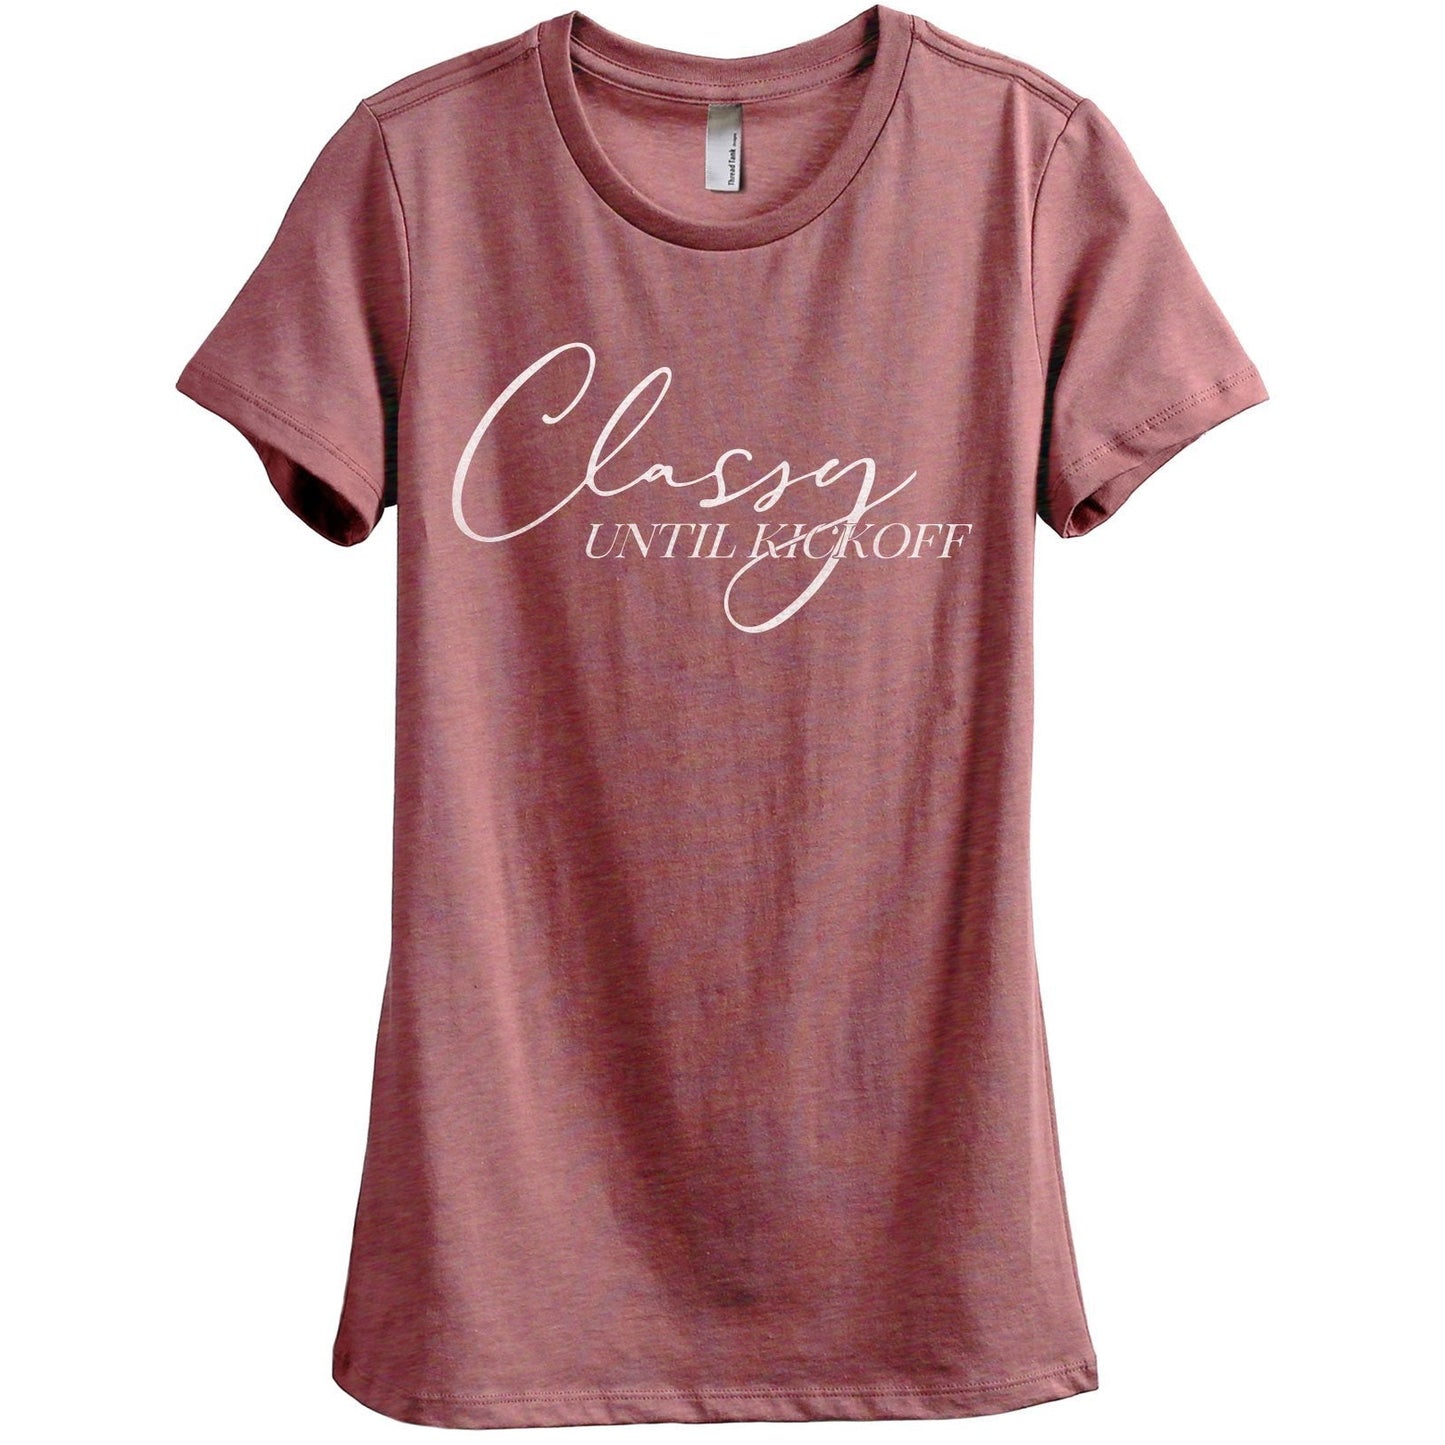 Classy Until Kickoff Women's Relaxed Crewneck T-Shirt Top Tee Heather Rouge